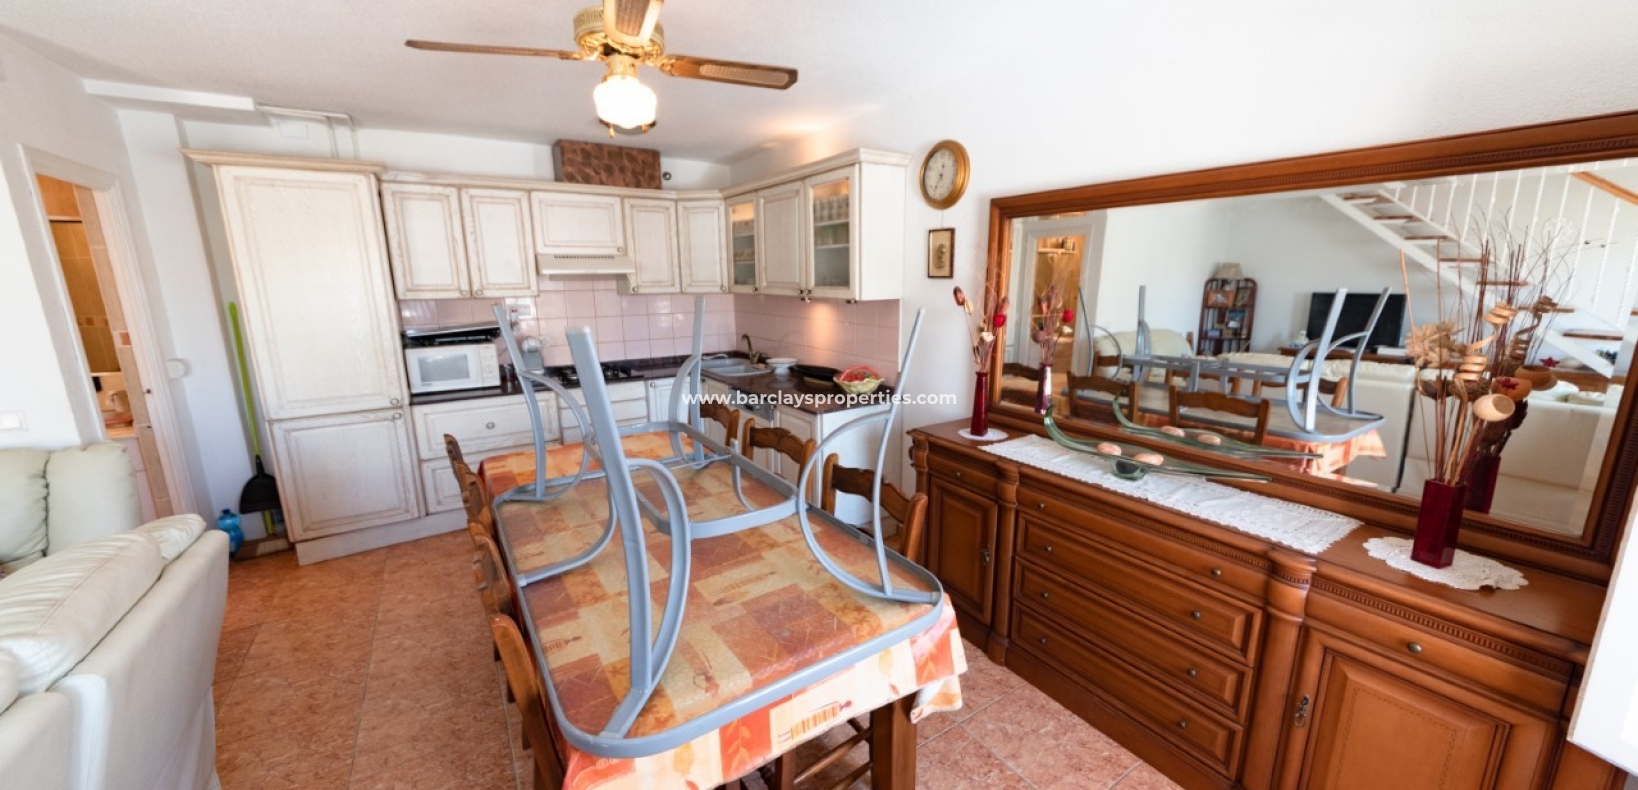 Dining Area-House For Sale in La Marina, Spain with sea views 